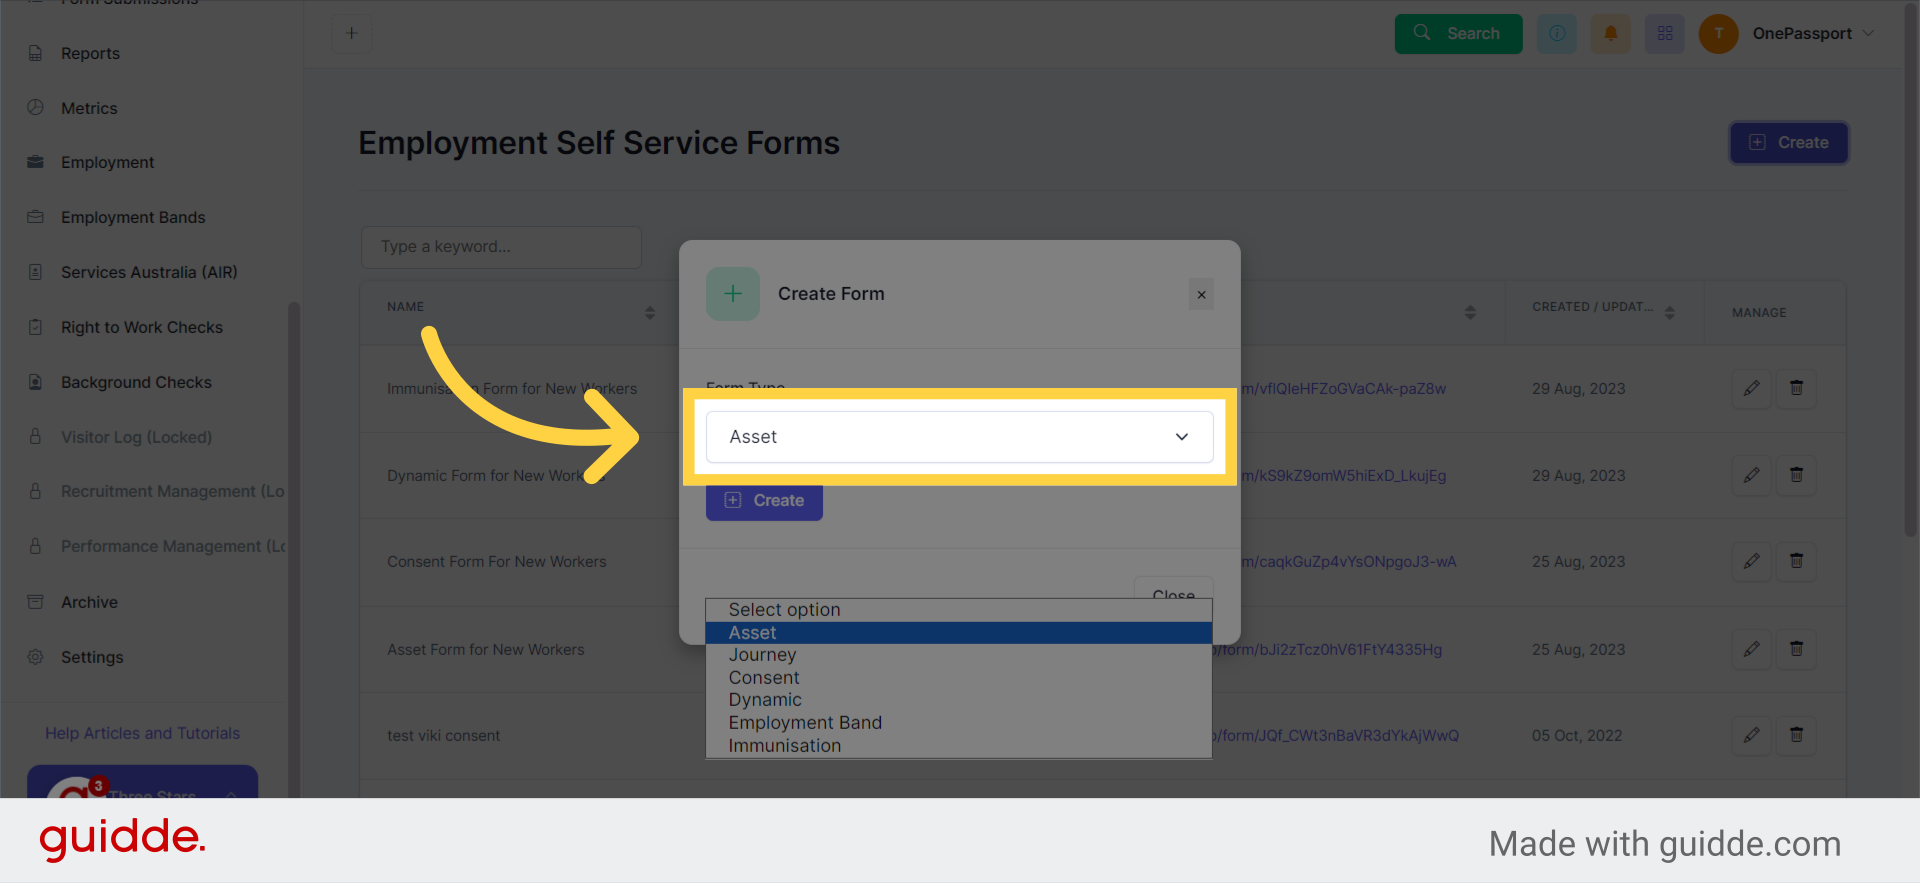 Select 'Journey' for the Form Type